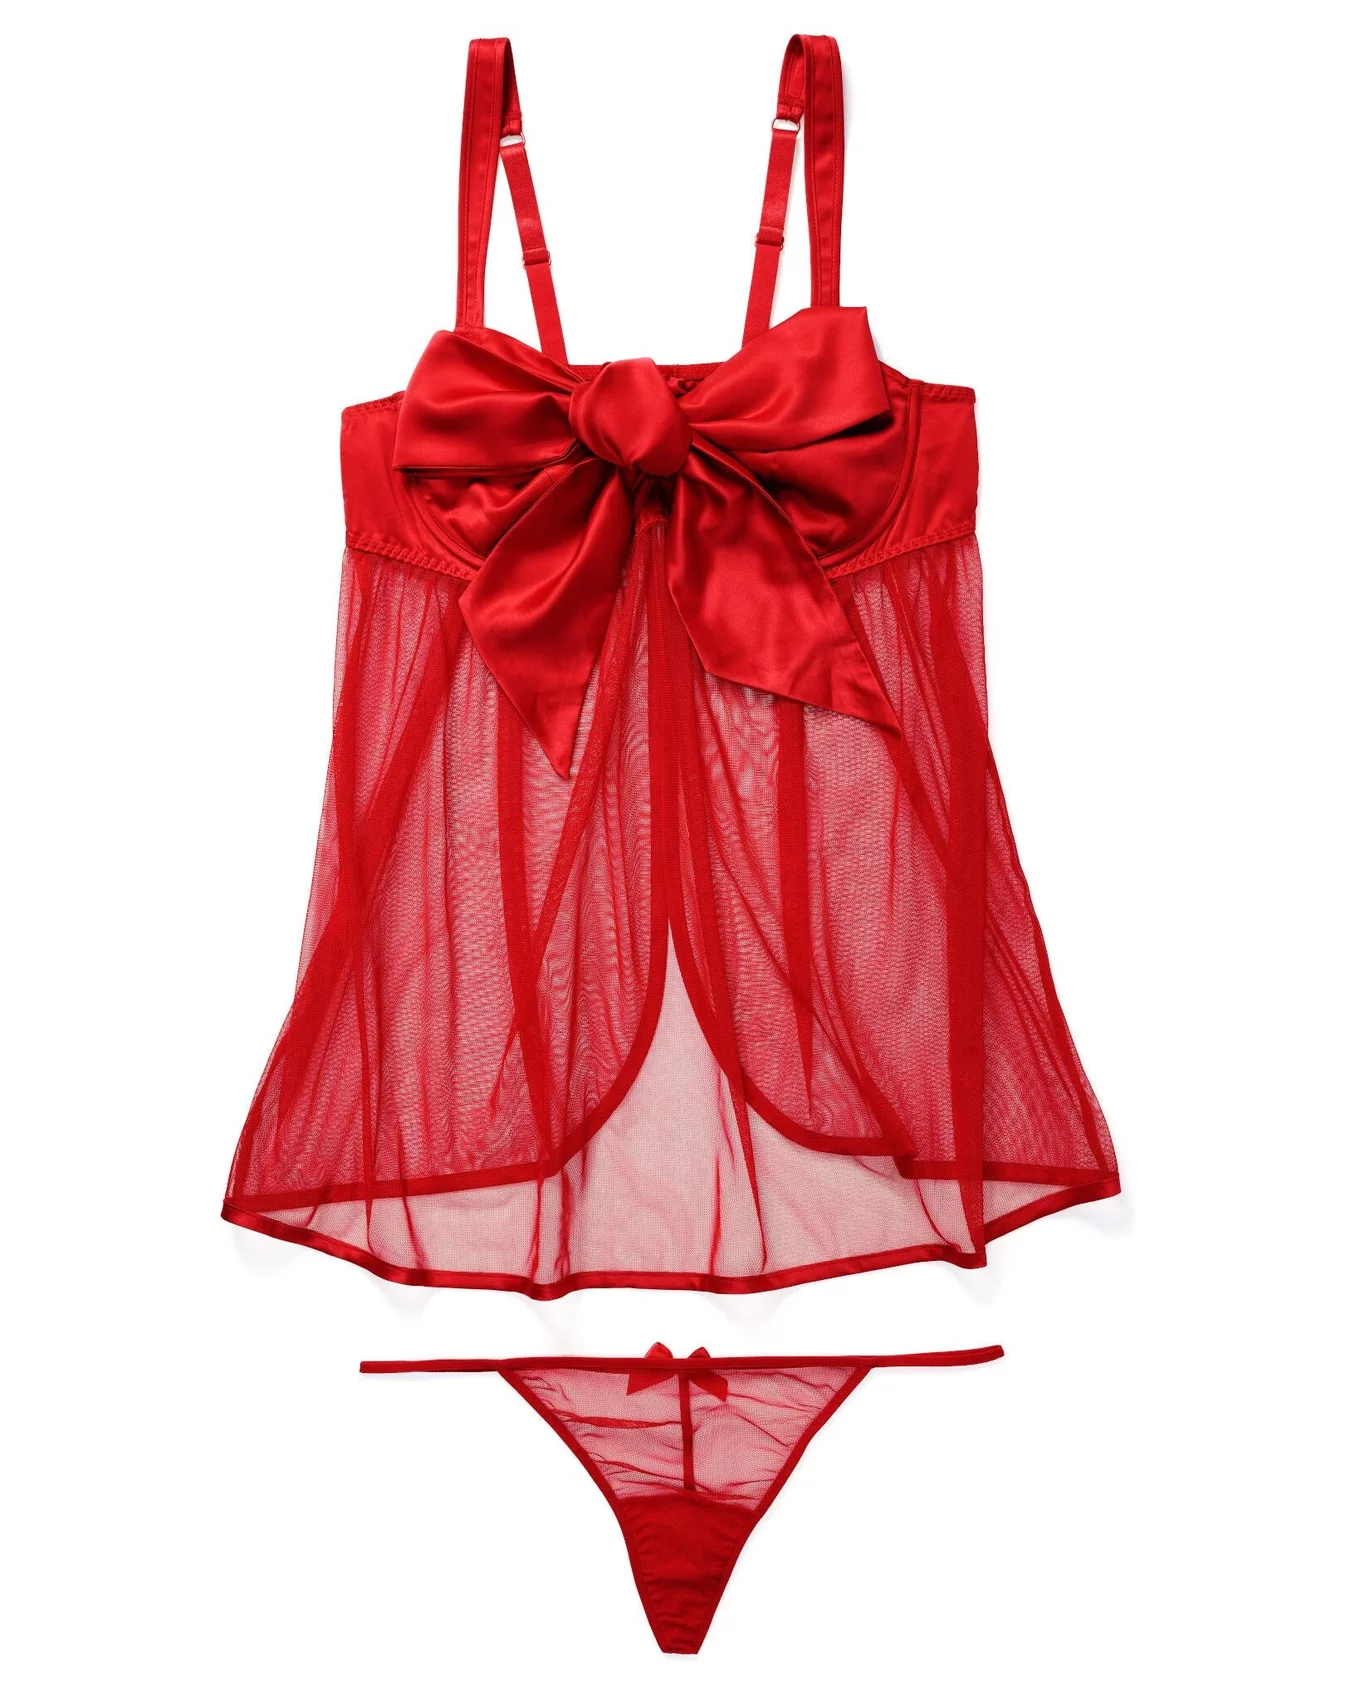 Adore Me NWT Gynger Unlined Quarter Cup Bra in True Red Small